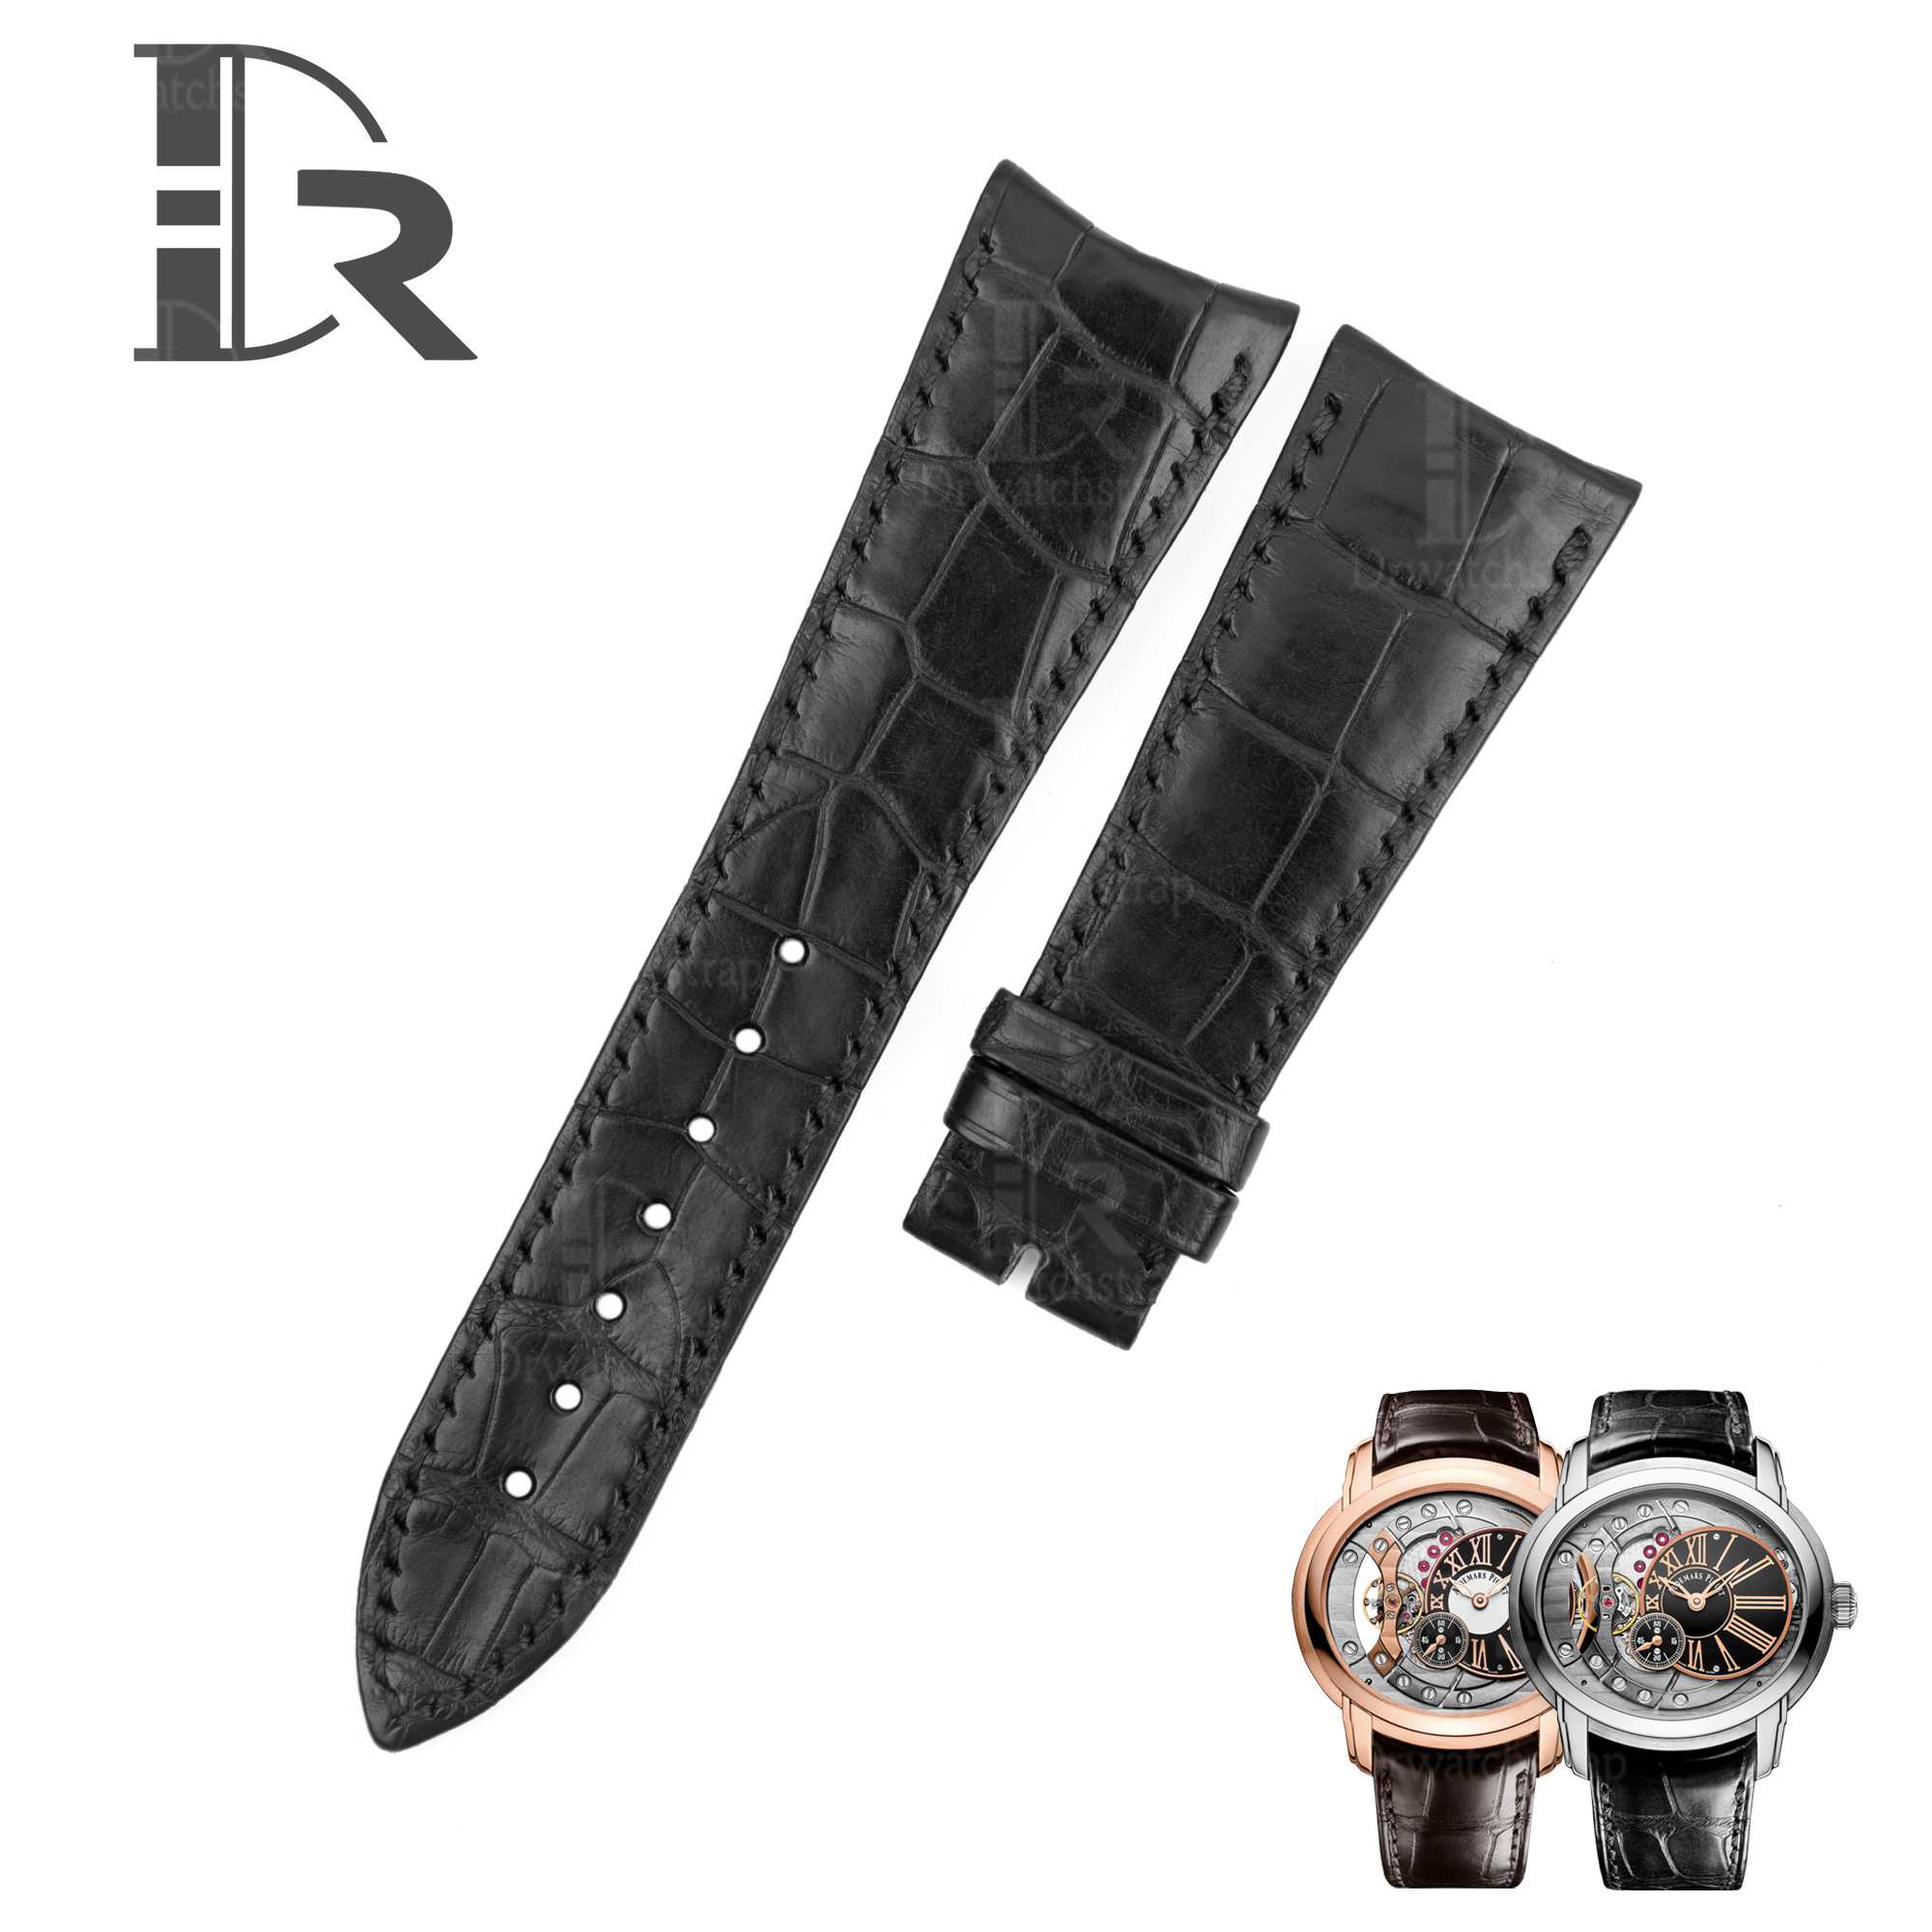 Custom alligator crocodile curved end links Audemars Piguet leather strap replacement Black Blue Brown White Orange Rose Gold bands with multi colors and sizes online for sale 20mm 22mm 24mm